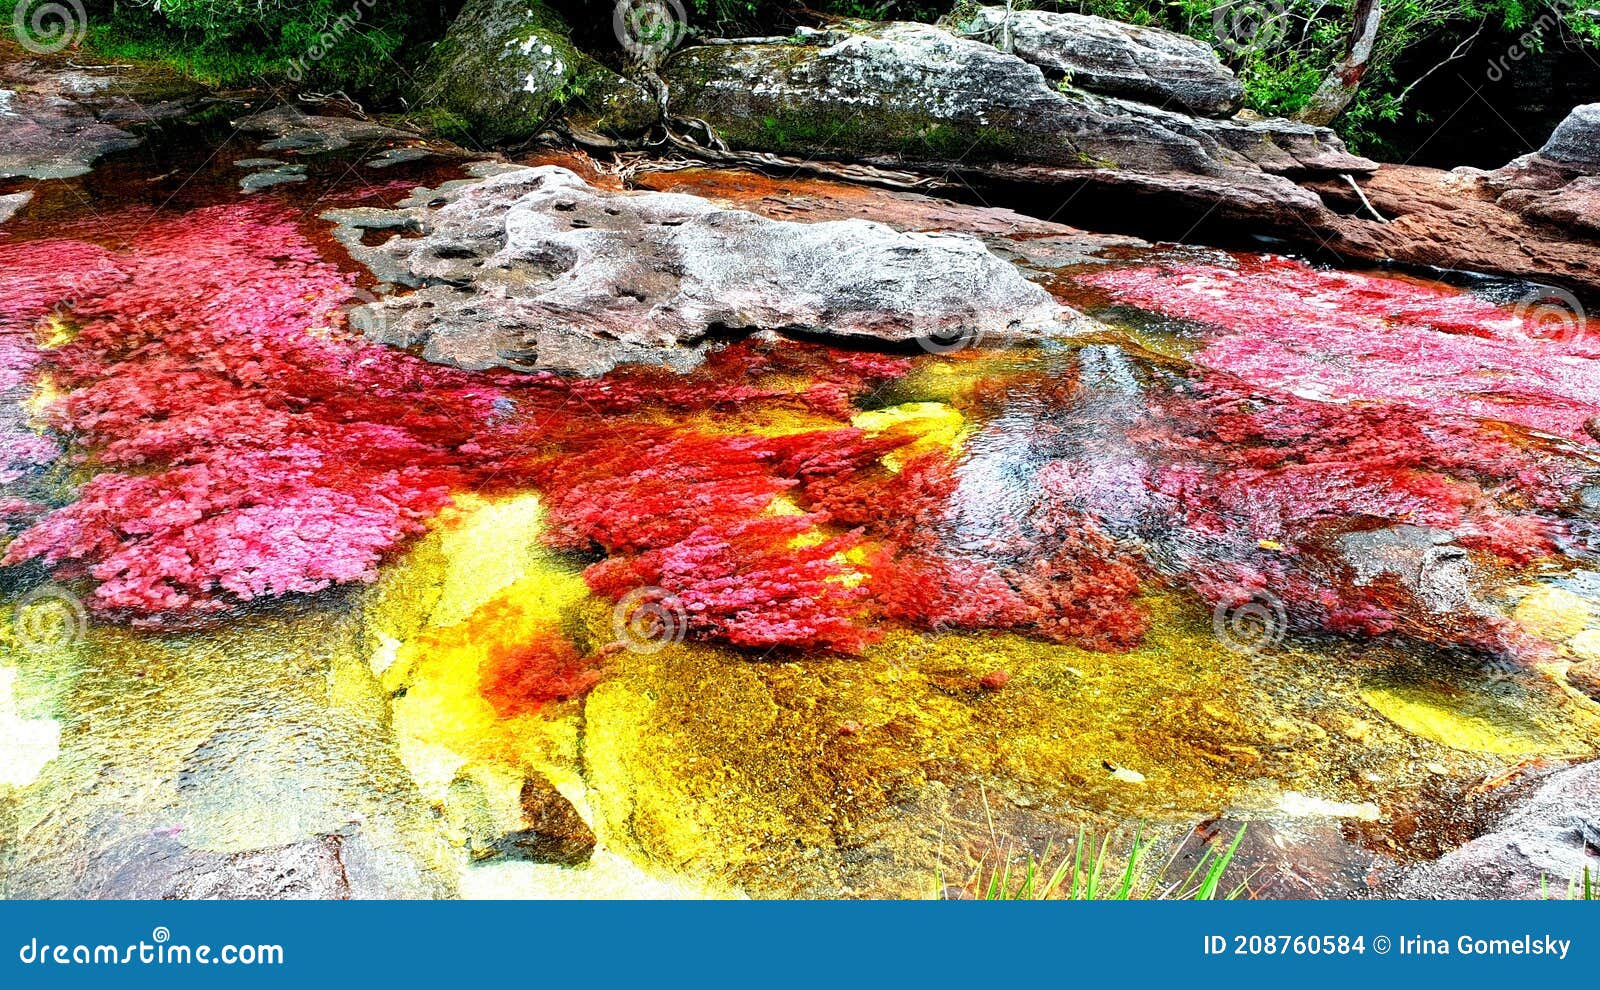 the most beautiful and unusual river in the world cano cristales